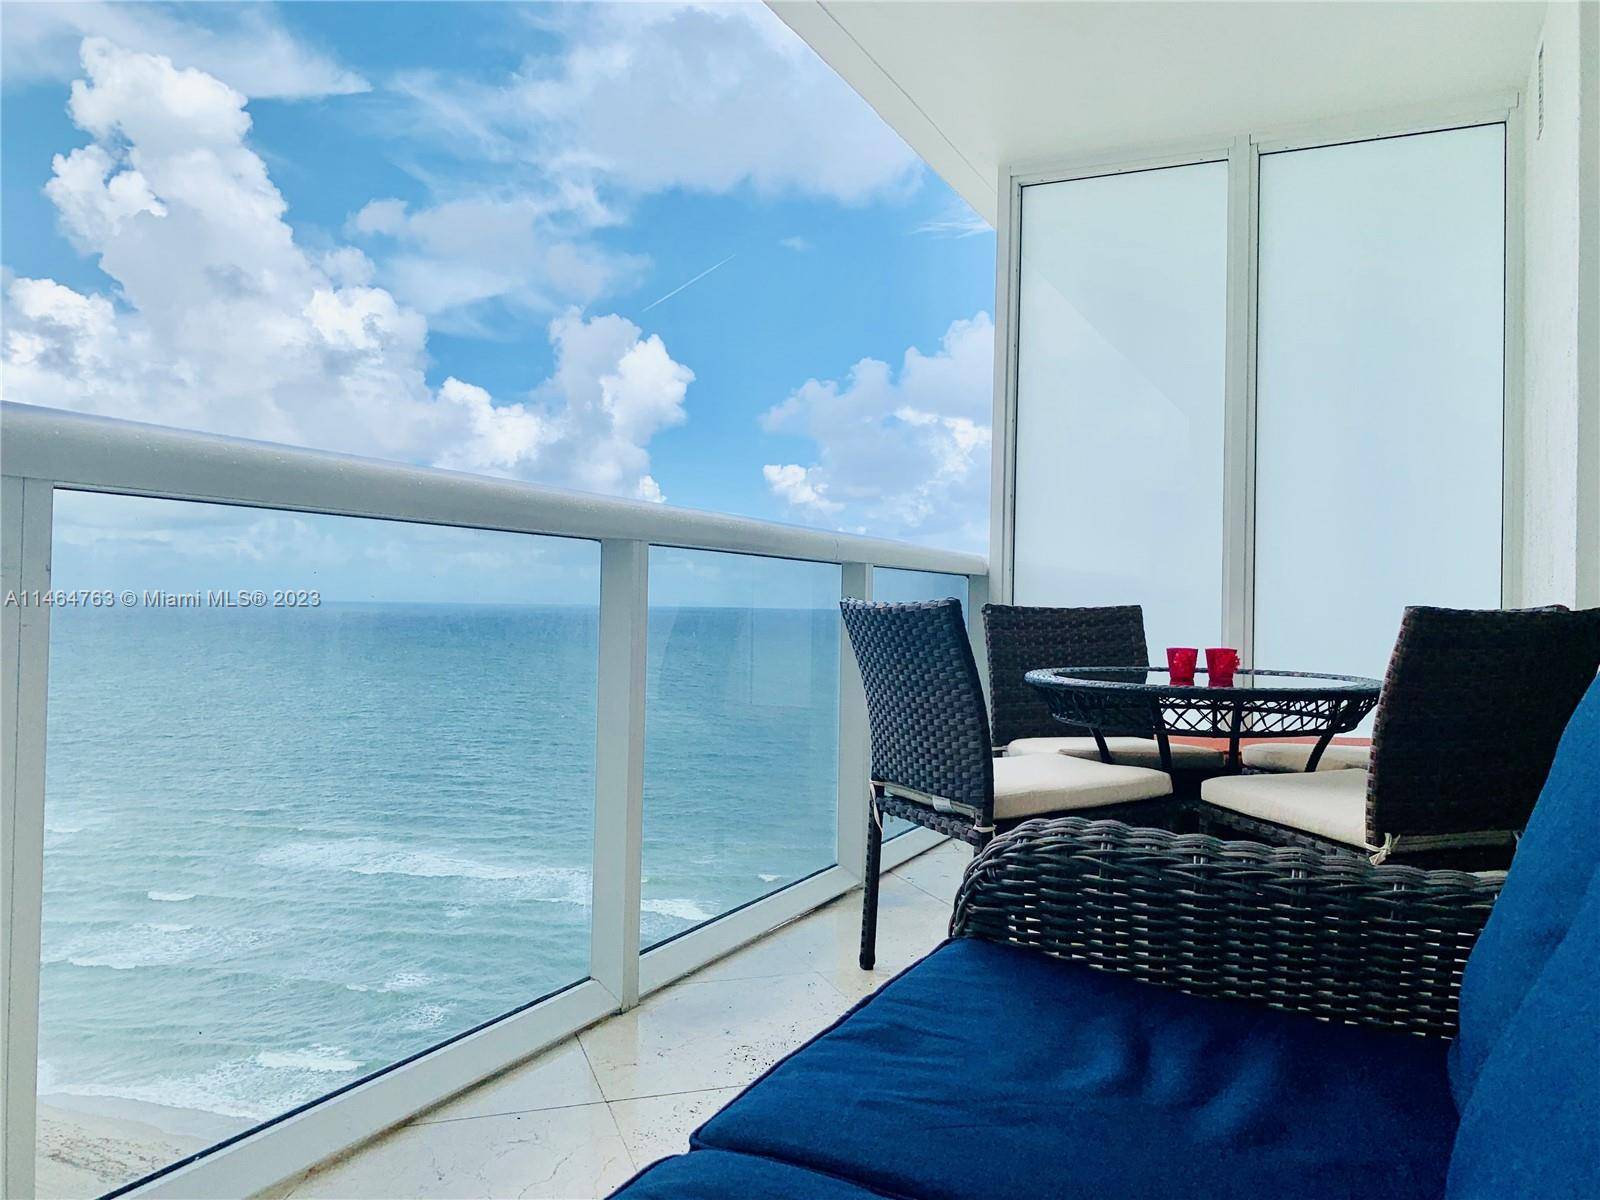 BEAUTIFUL AND FULLY FURNISHED 1 BD, 1 BATH APARTMENT IN THE FAMOUS BEACH CLUB TOWER TWO LARGE BALCONY WITH SPECTACULAR OCEAN INTRACOASTAL VIEWS WASHER DRYER IN THE UNIT.